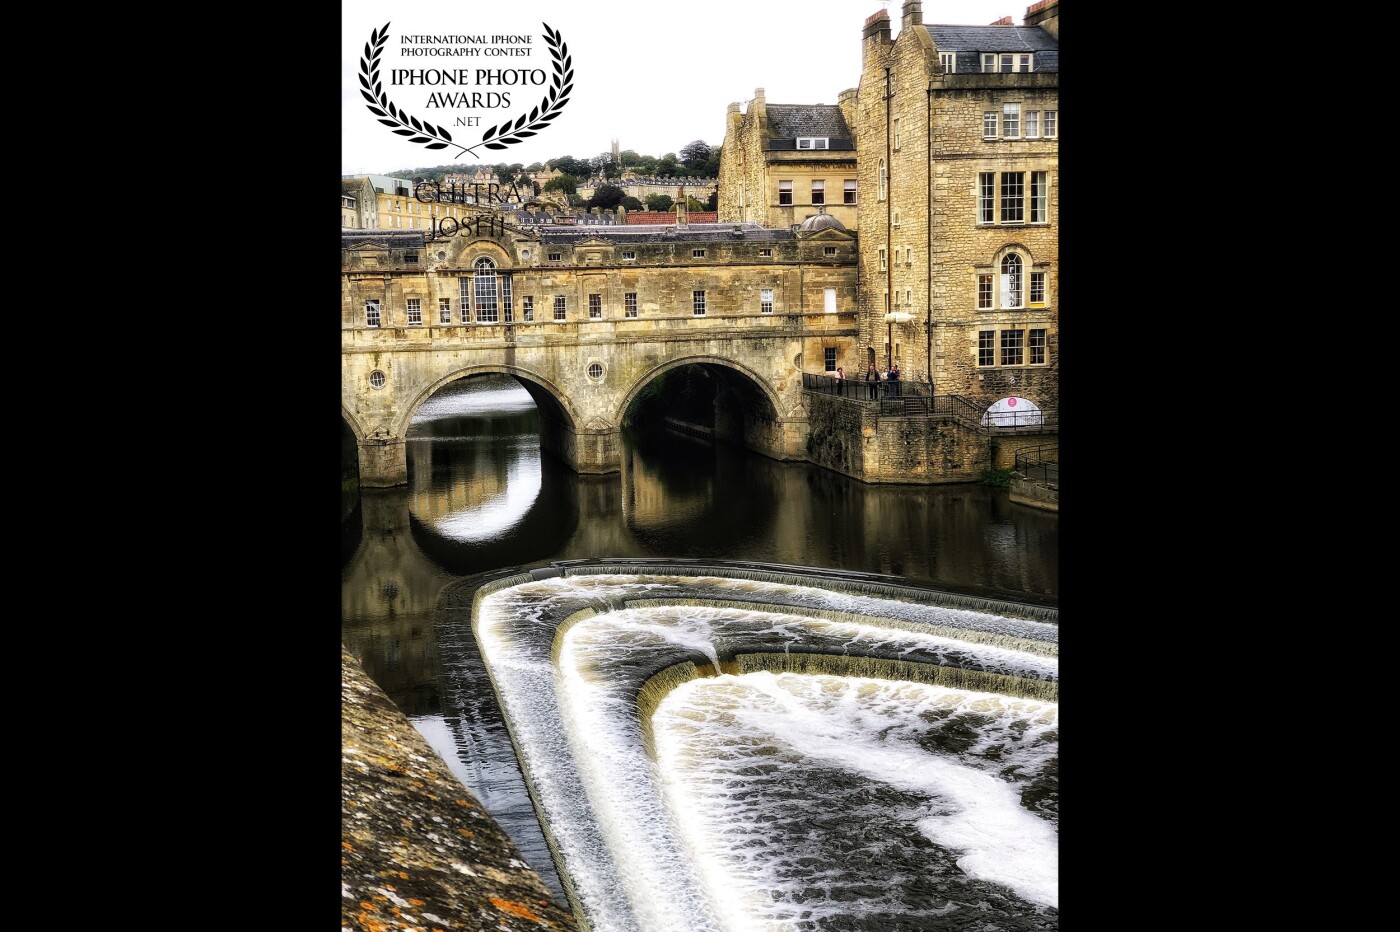 Here we have a famous architectural sensation, “Pulteney Bridge” in the wonderful city of Bath, United Kingdom. Fantastic Georgian architecture with shops across its full span on both sides. Do you see the eye-catching view of River Avon, flowing below the bridge? And the stunning radiance, that the gushing water emits? That's the beauty of the place.